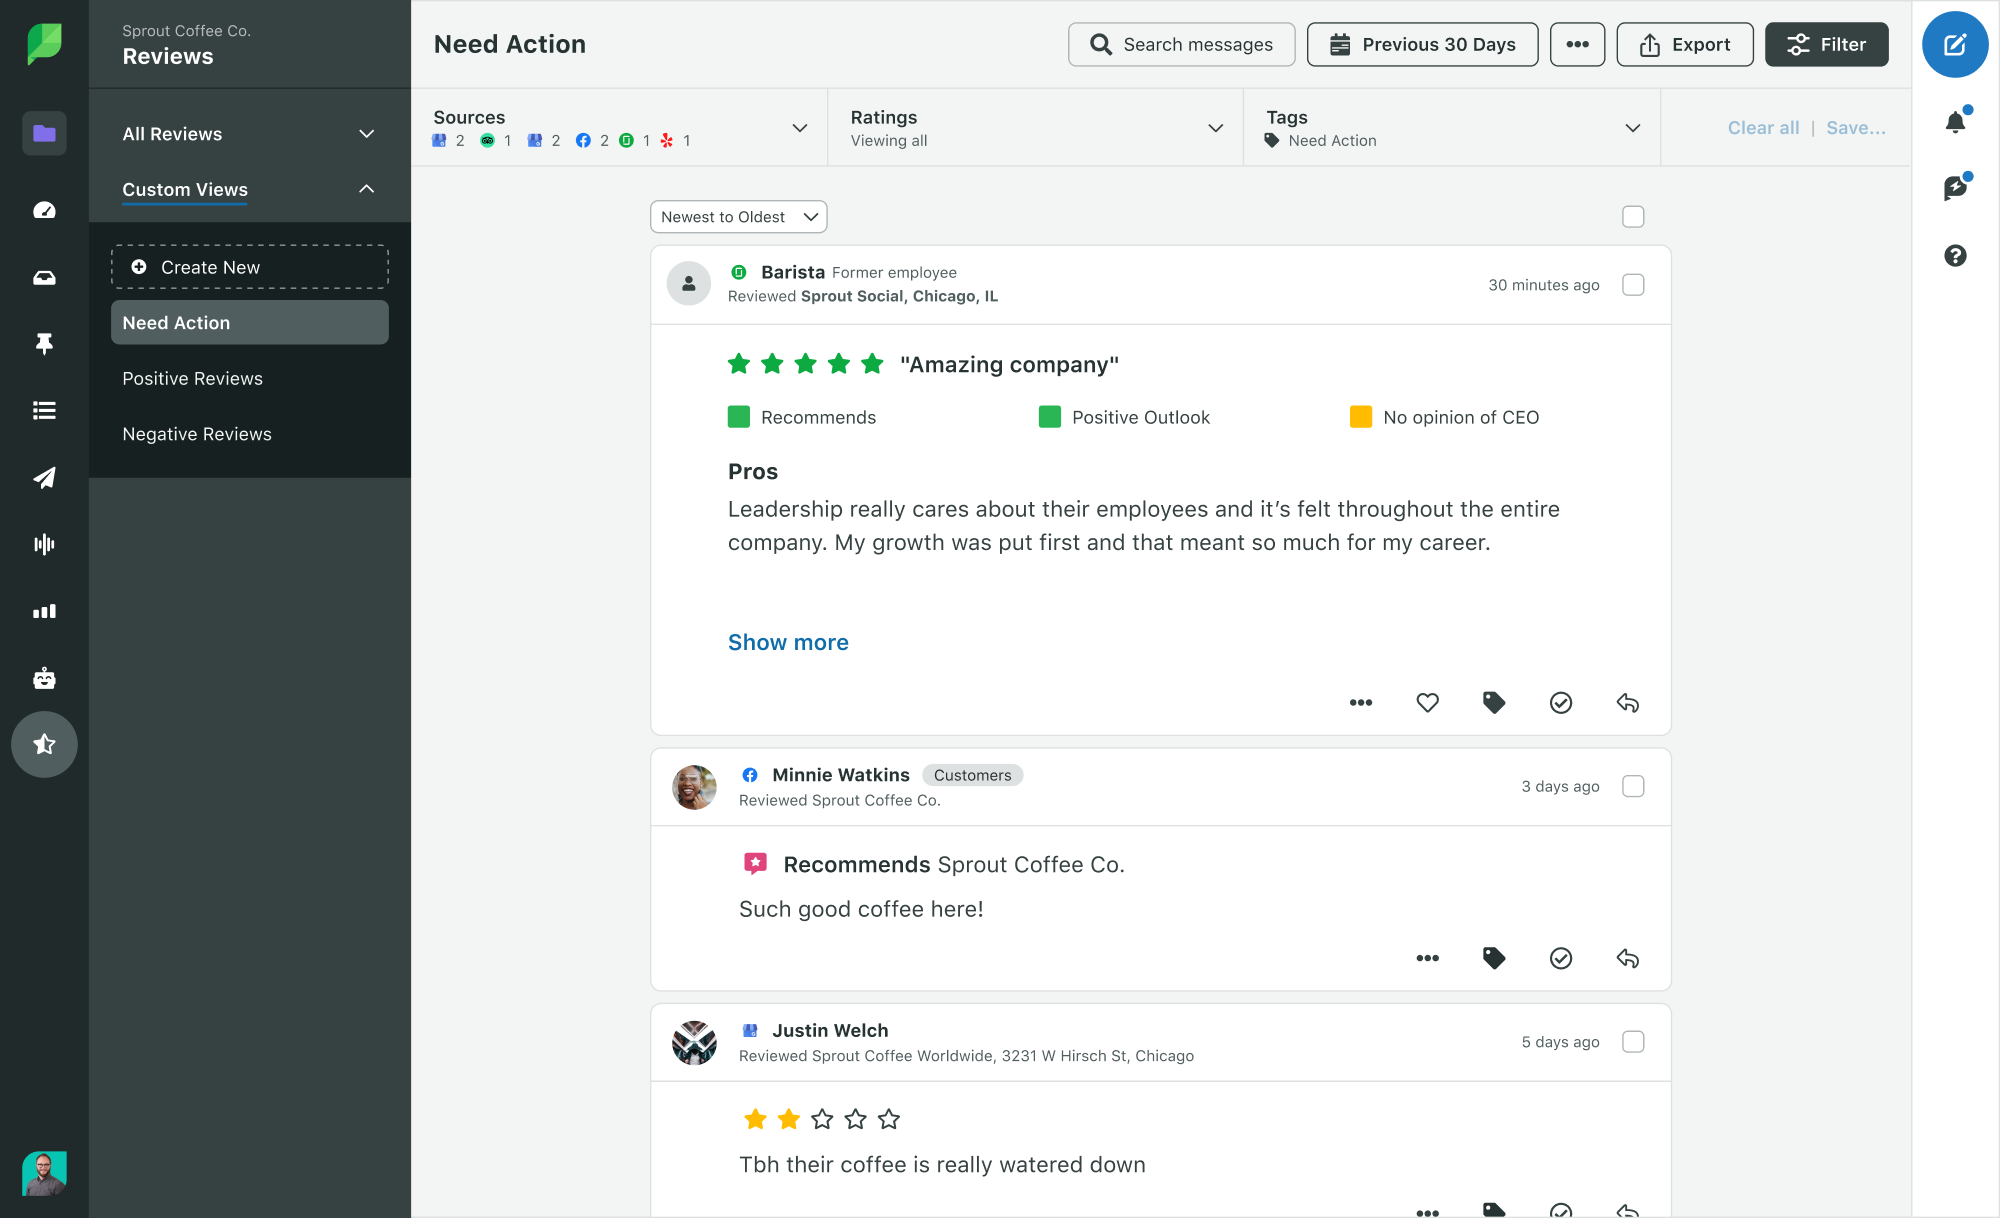 Sprout Social dashboard showing reviews from various networks like 